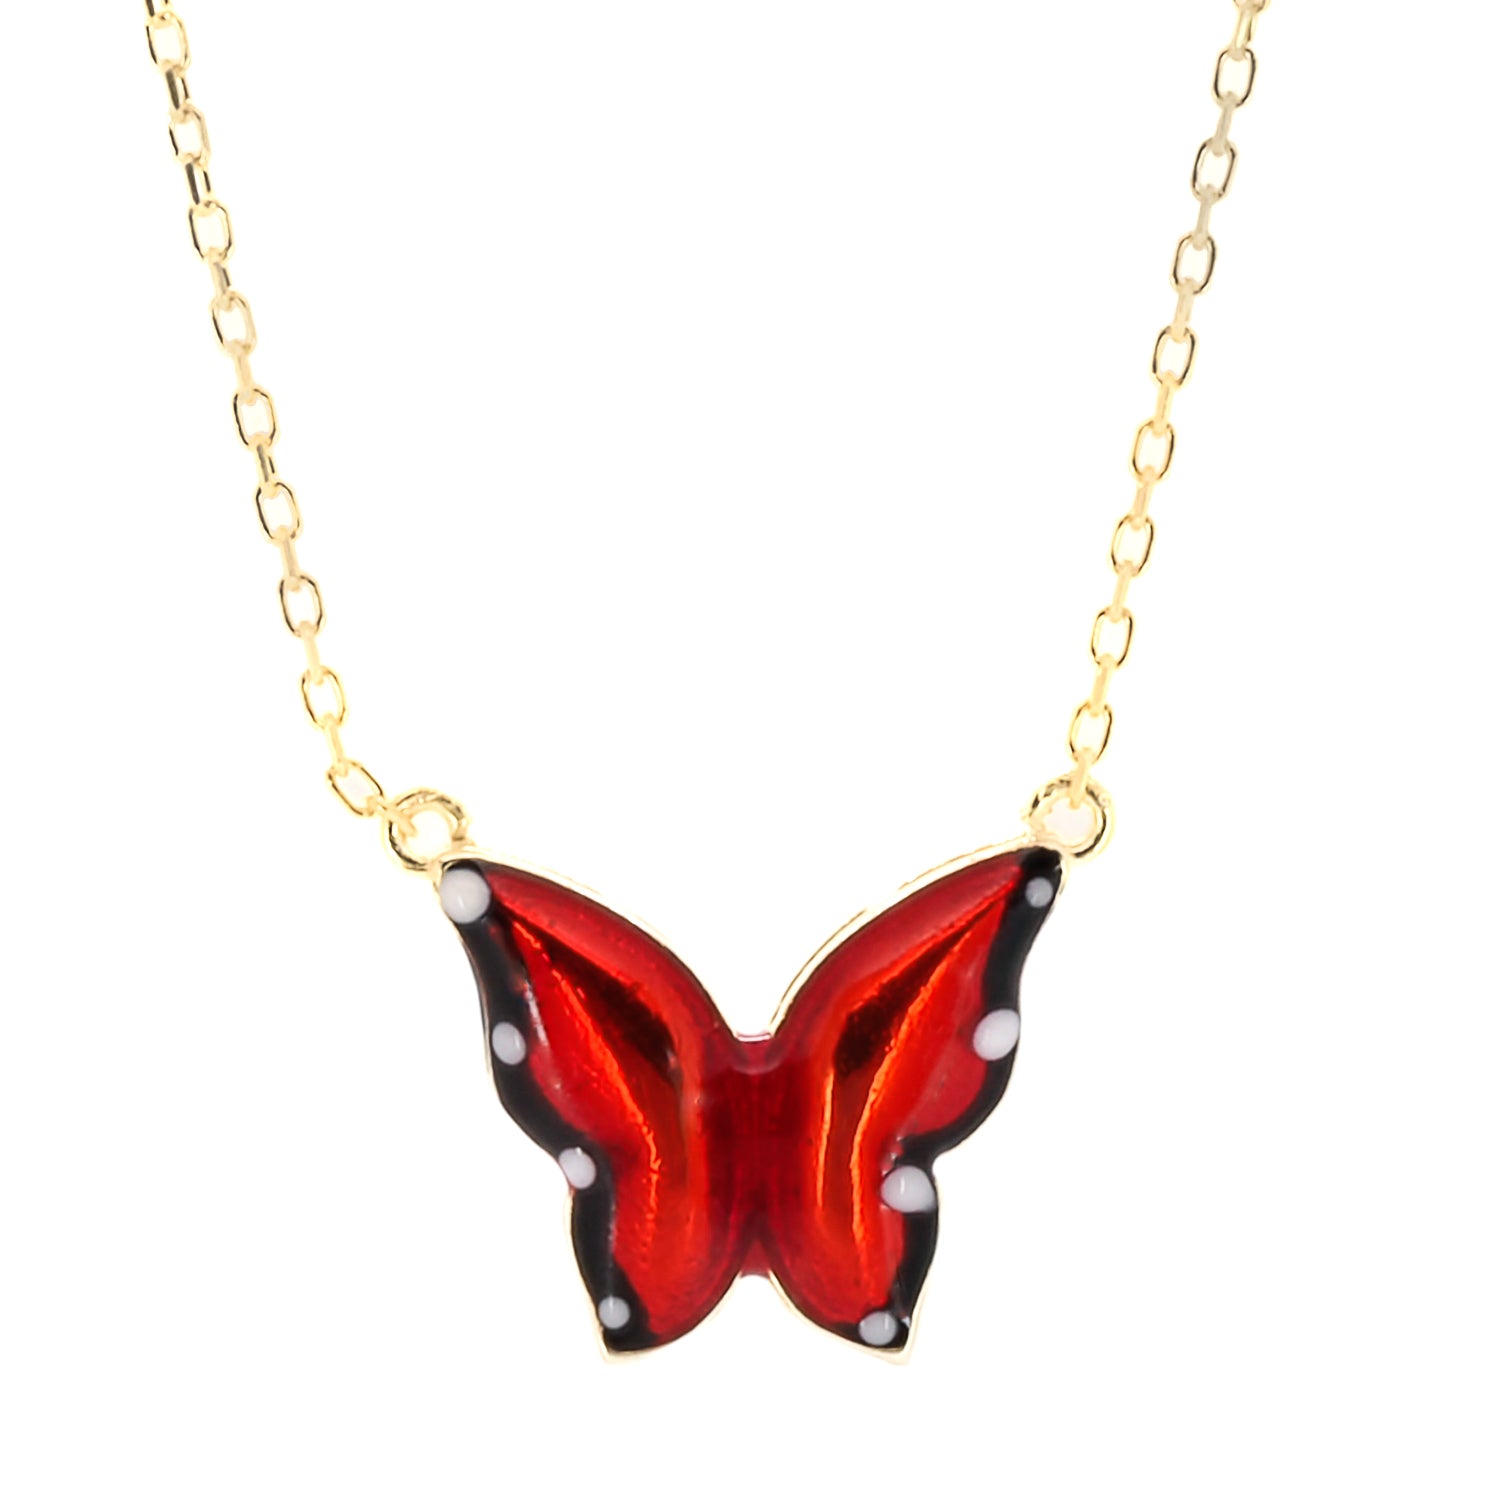 The Gold Joy Red Enamel Butterfly Necklace, a symbol of transformation and inner growth.